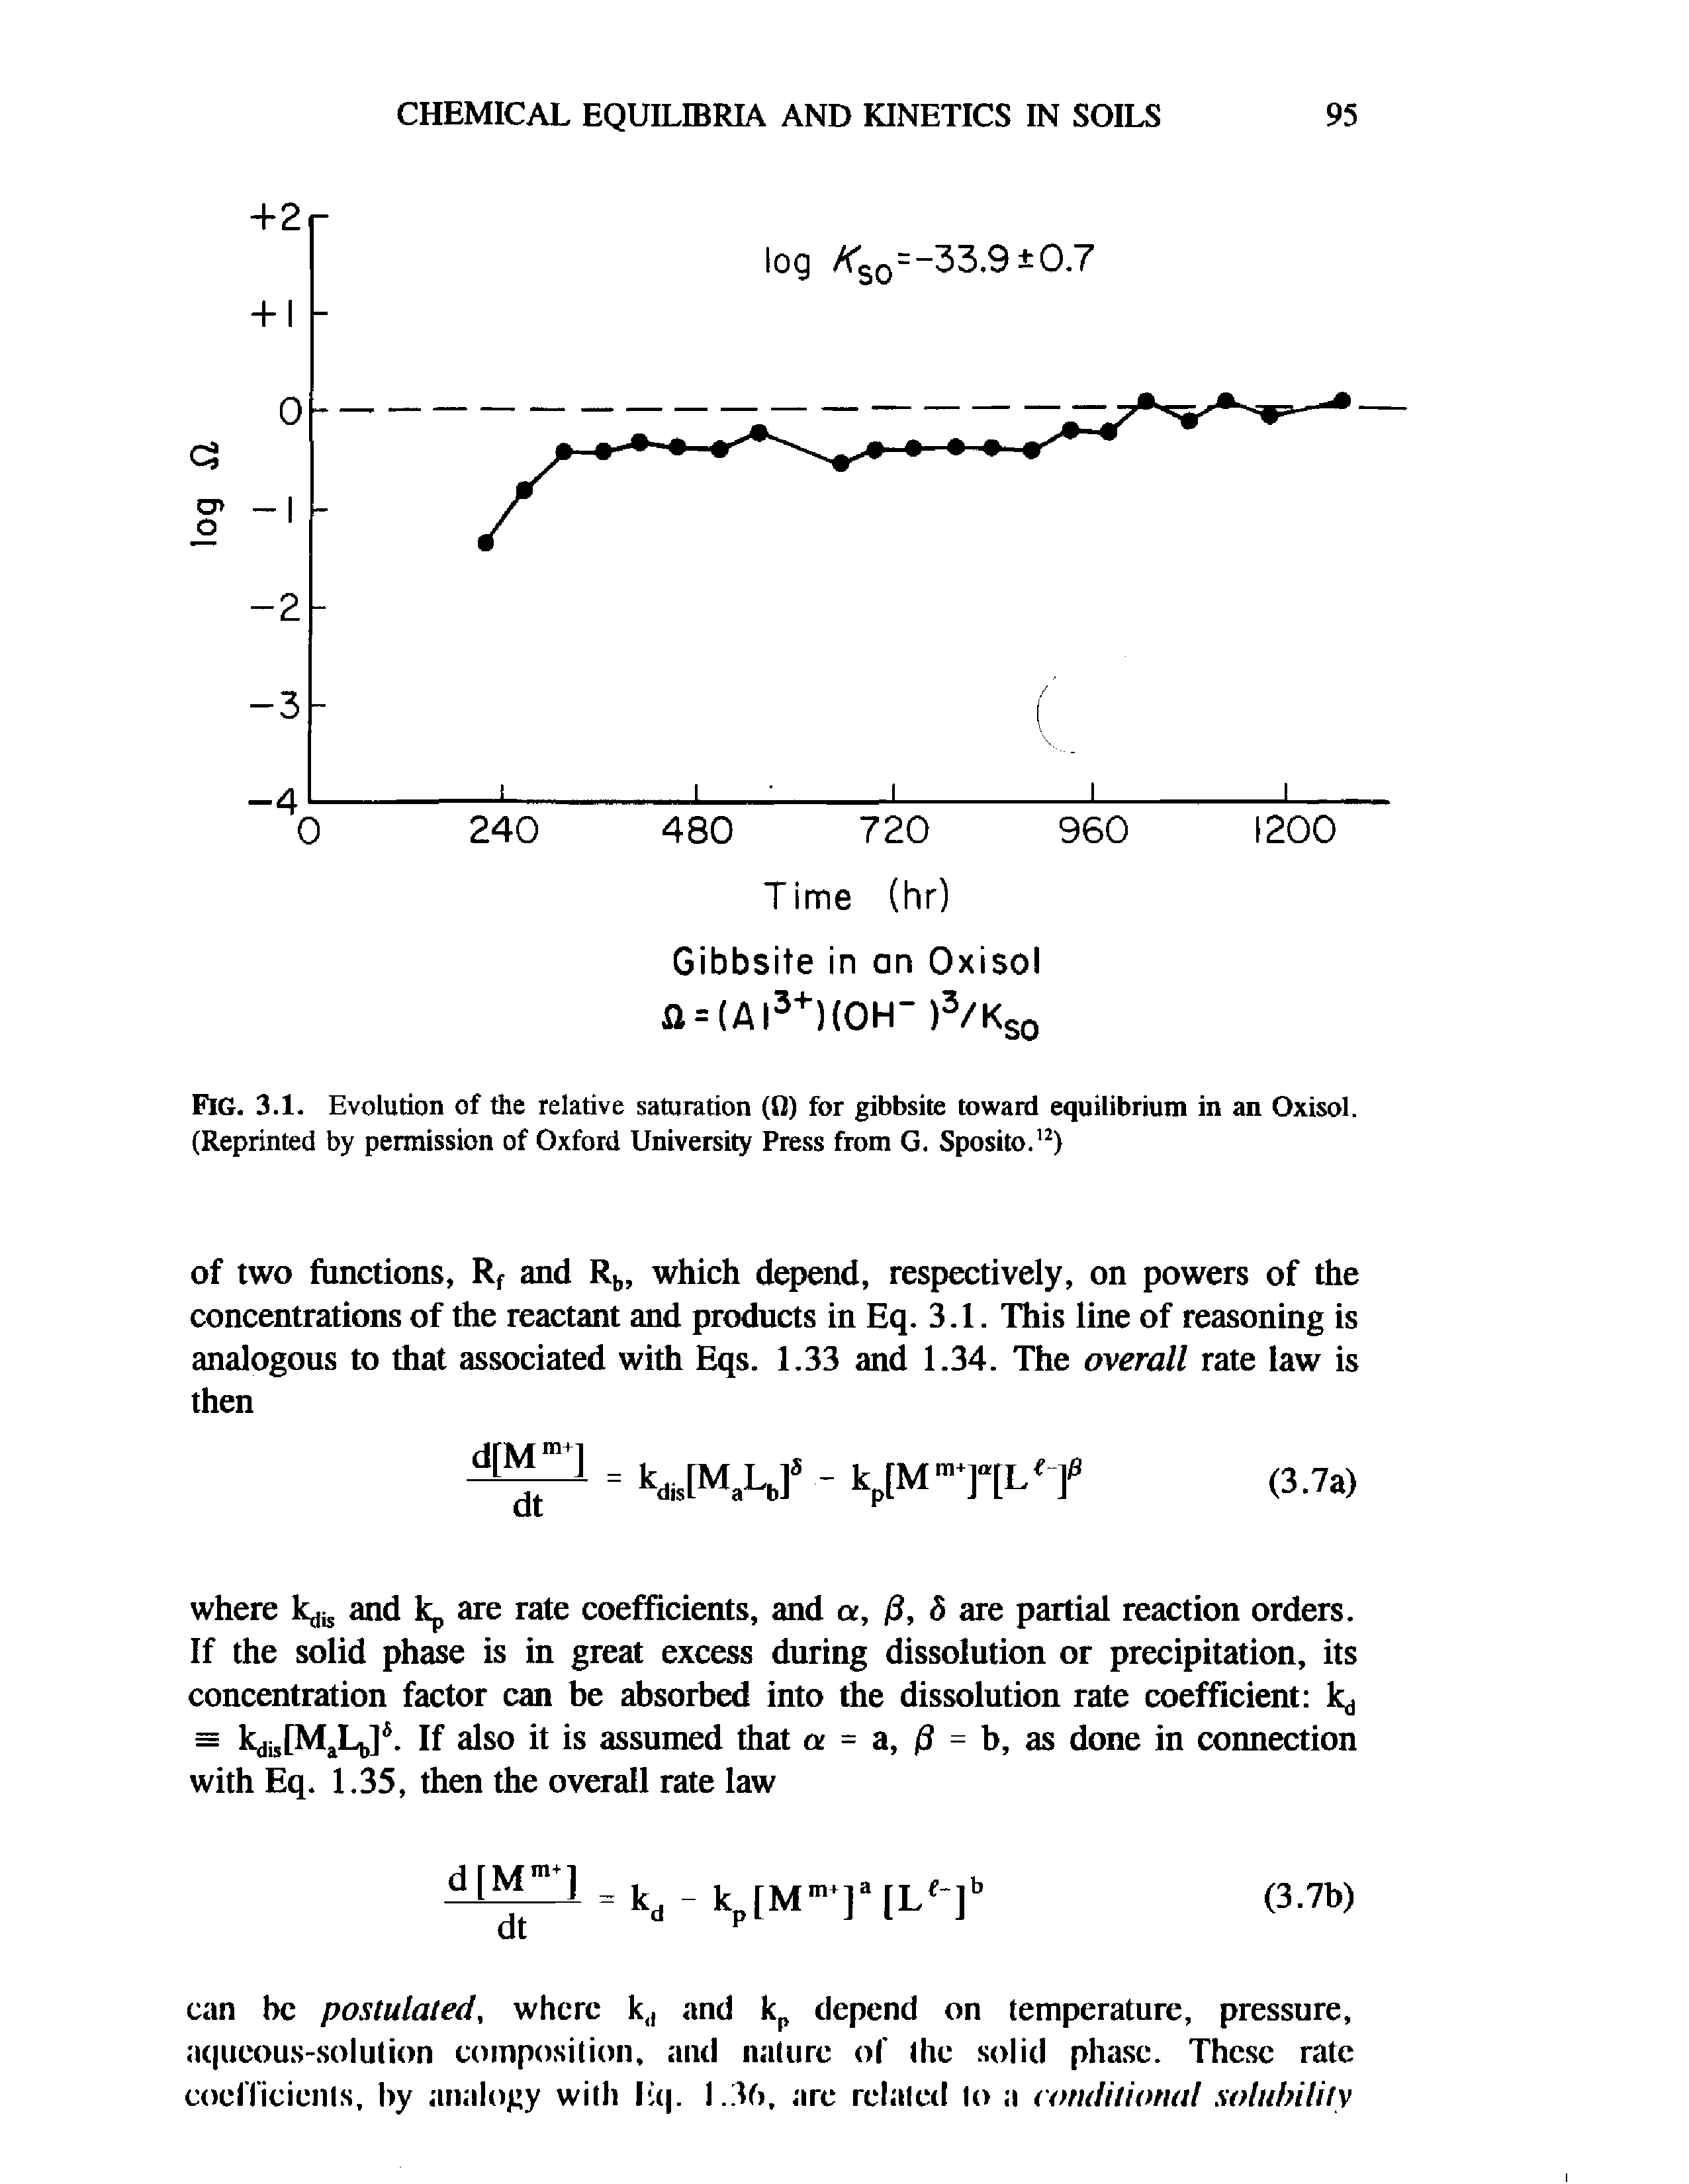 Fig. 3.1. Evolution of the relative saturation (fi) for gibbsite toward equilibrium in an Oxisol. (Reprinted by permission of Oxford University Press from G. Sposito.12)...